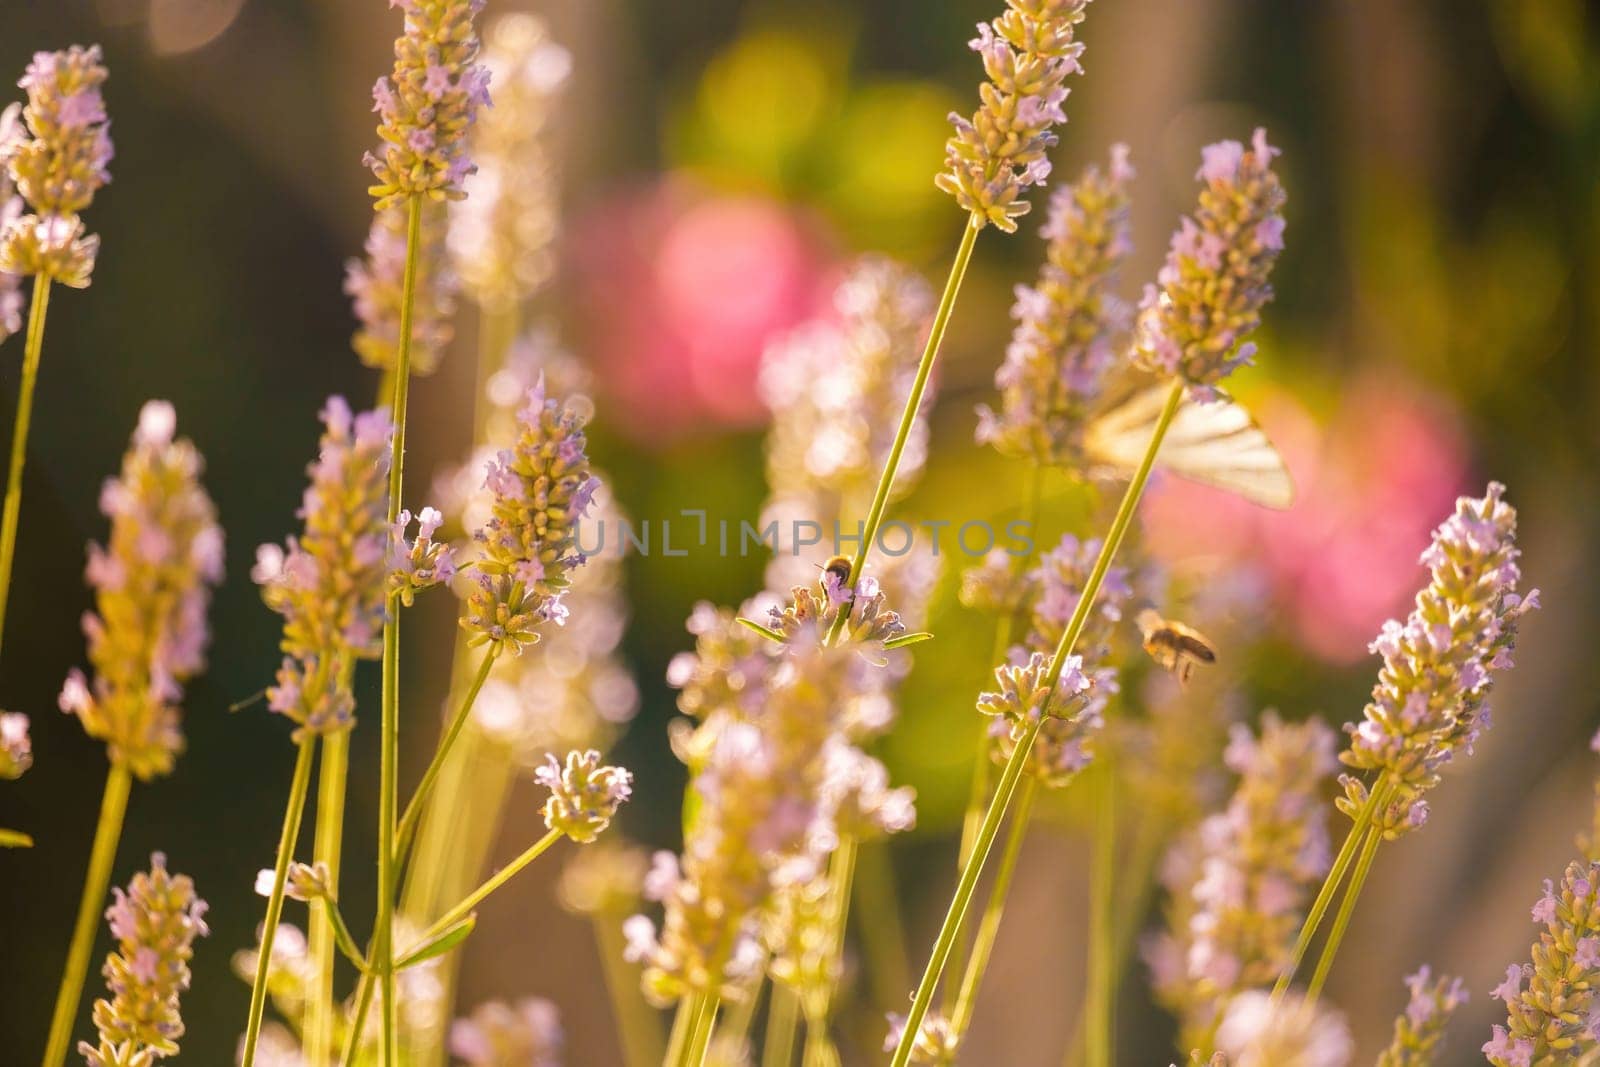 Honey bee collecting pollen on flowers in the sunny day on the blurred background, close up.